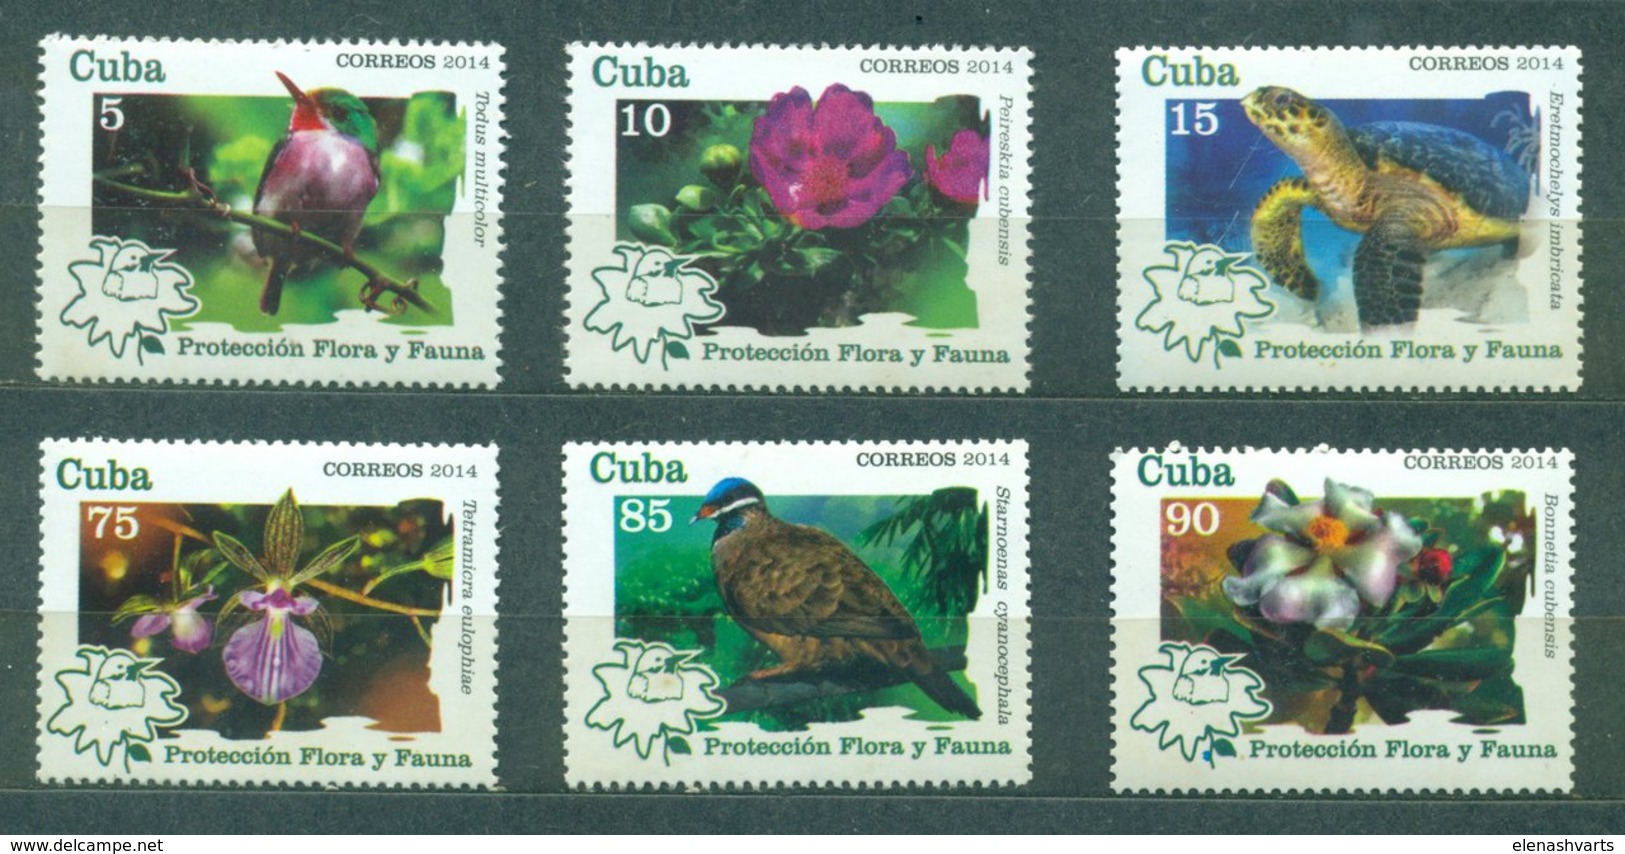 Cuba 2014 Protection Of Flora And Fauna  (MNH)  - Flowers, Birds, Turtles, Sea Turtles - Unused Stamps